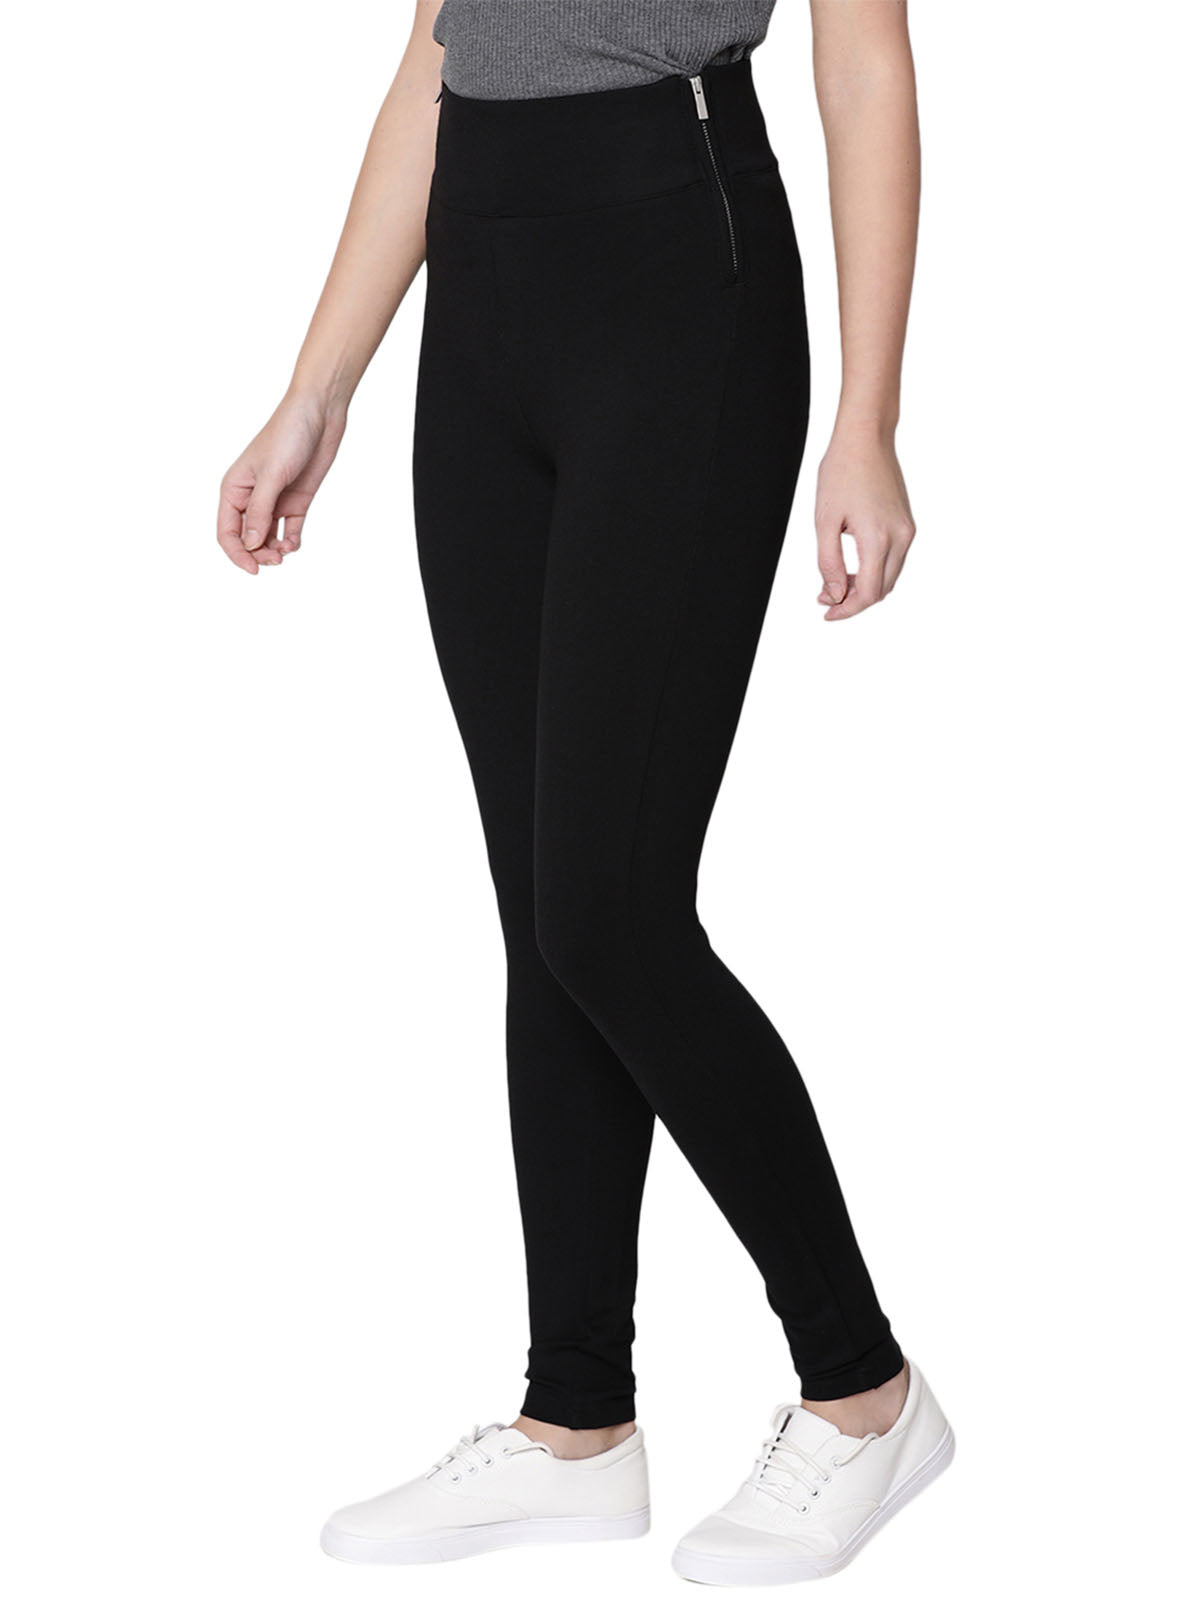 Women High Rise Skinny Fit Black Ponte Pant With Power StretchHigh Heighted Waist Band & Side Zipper Closings Brings The Best Comfort